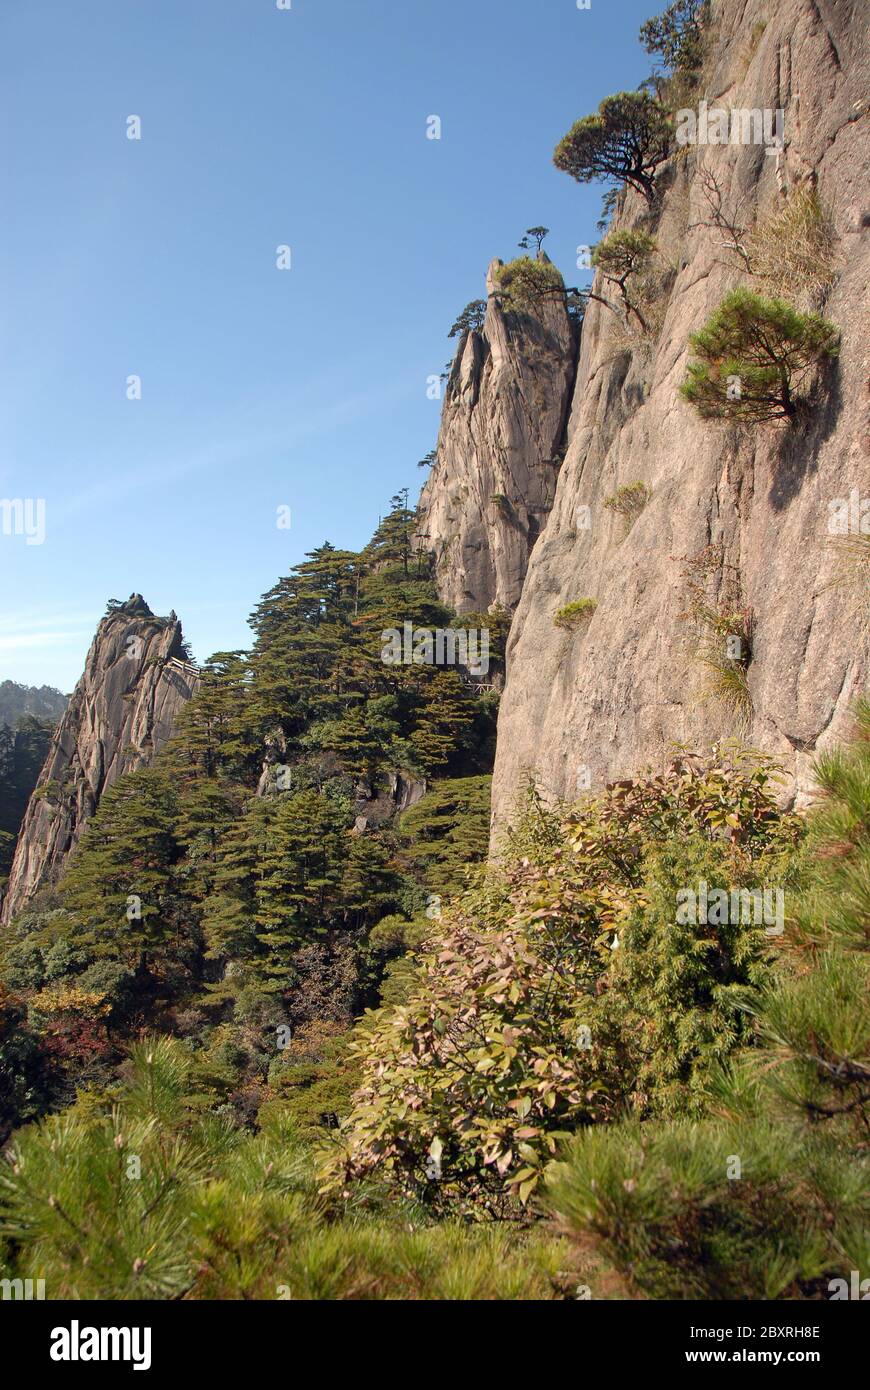 Huangshan Mountain in Anhui Province, China. Scenic view of mountain peaks, cliffs and trees in the West Sea or Xi Hai canyon on Huangshan Stock Photo